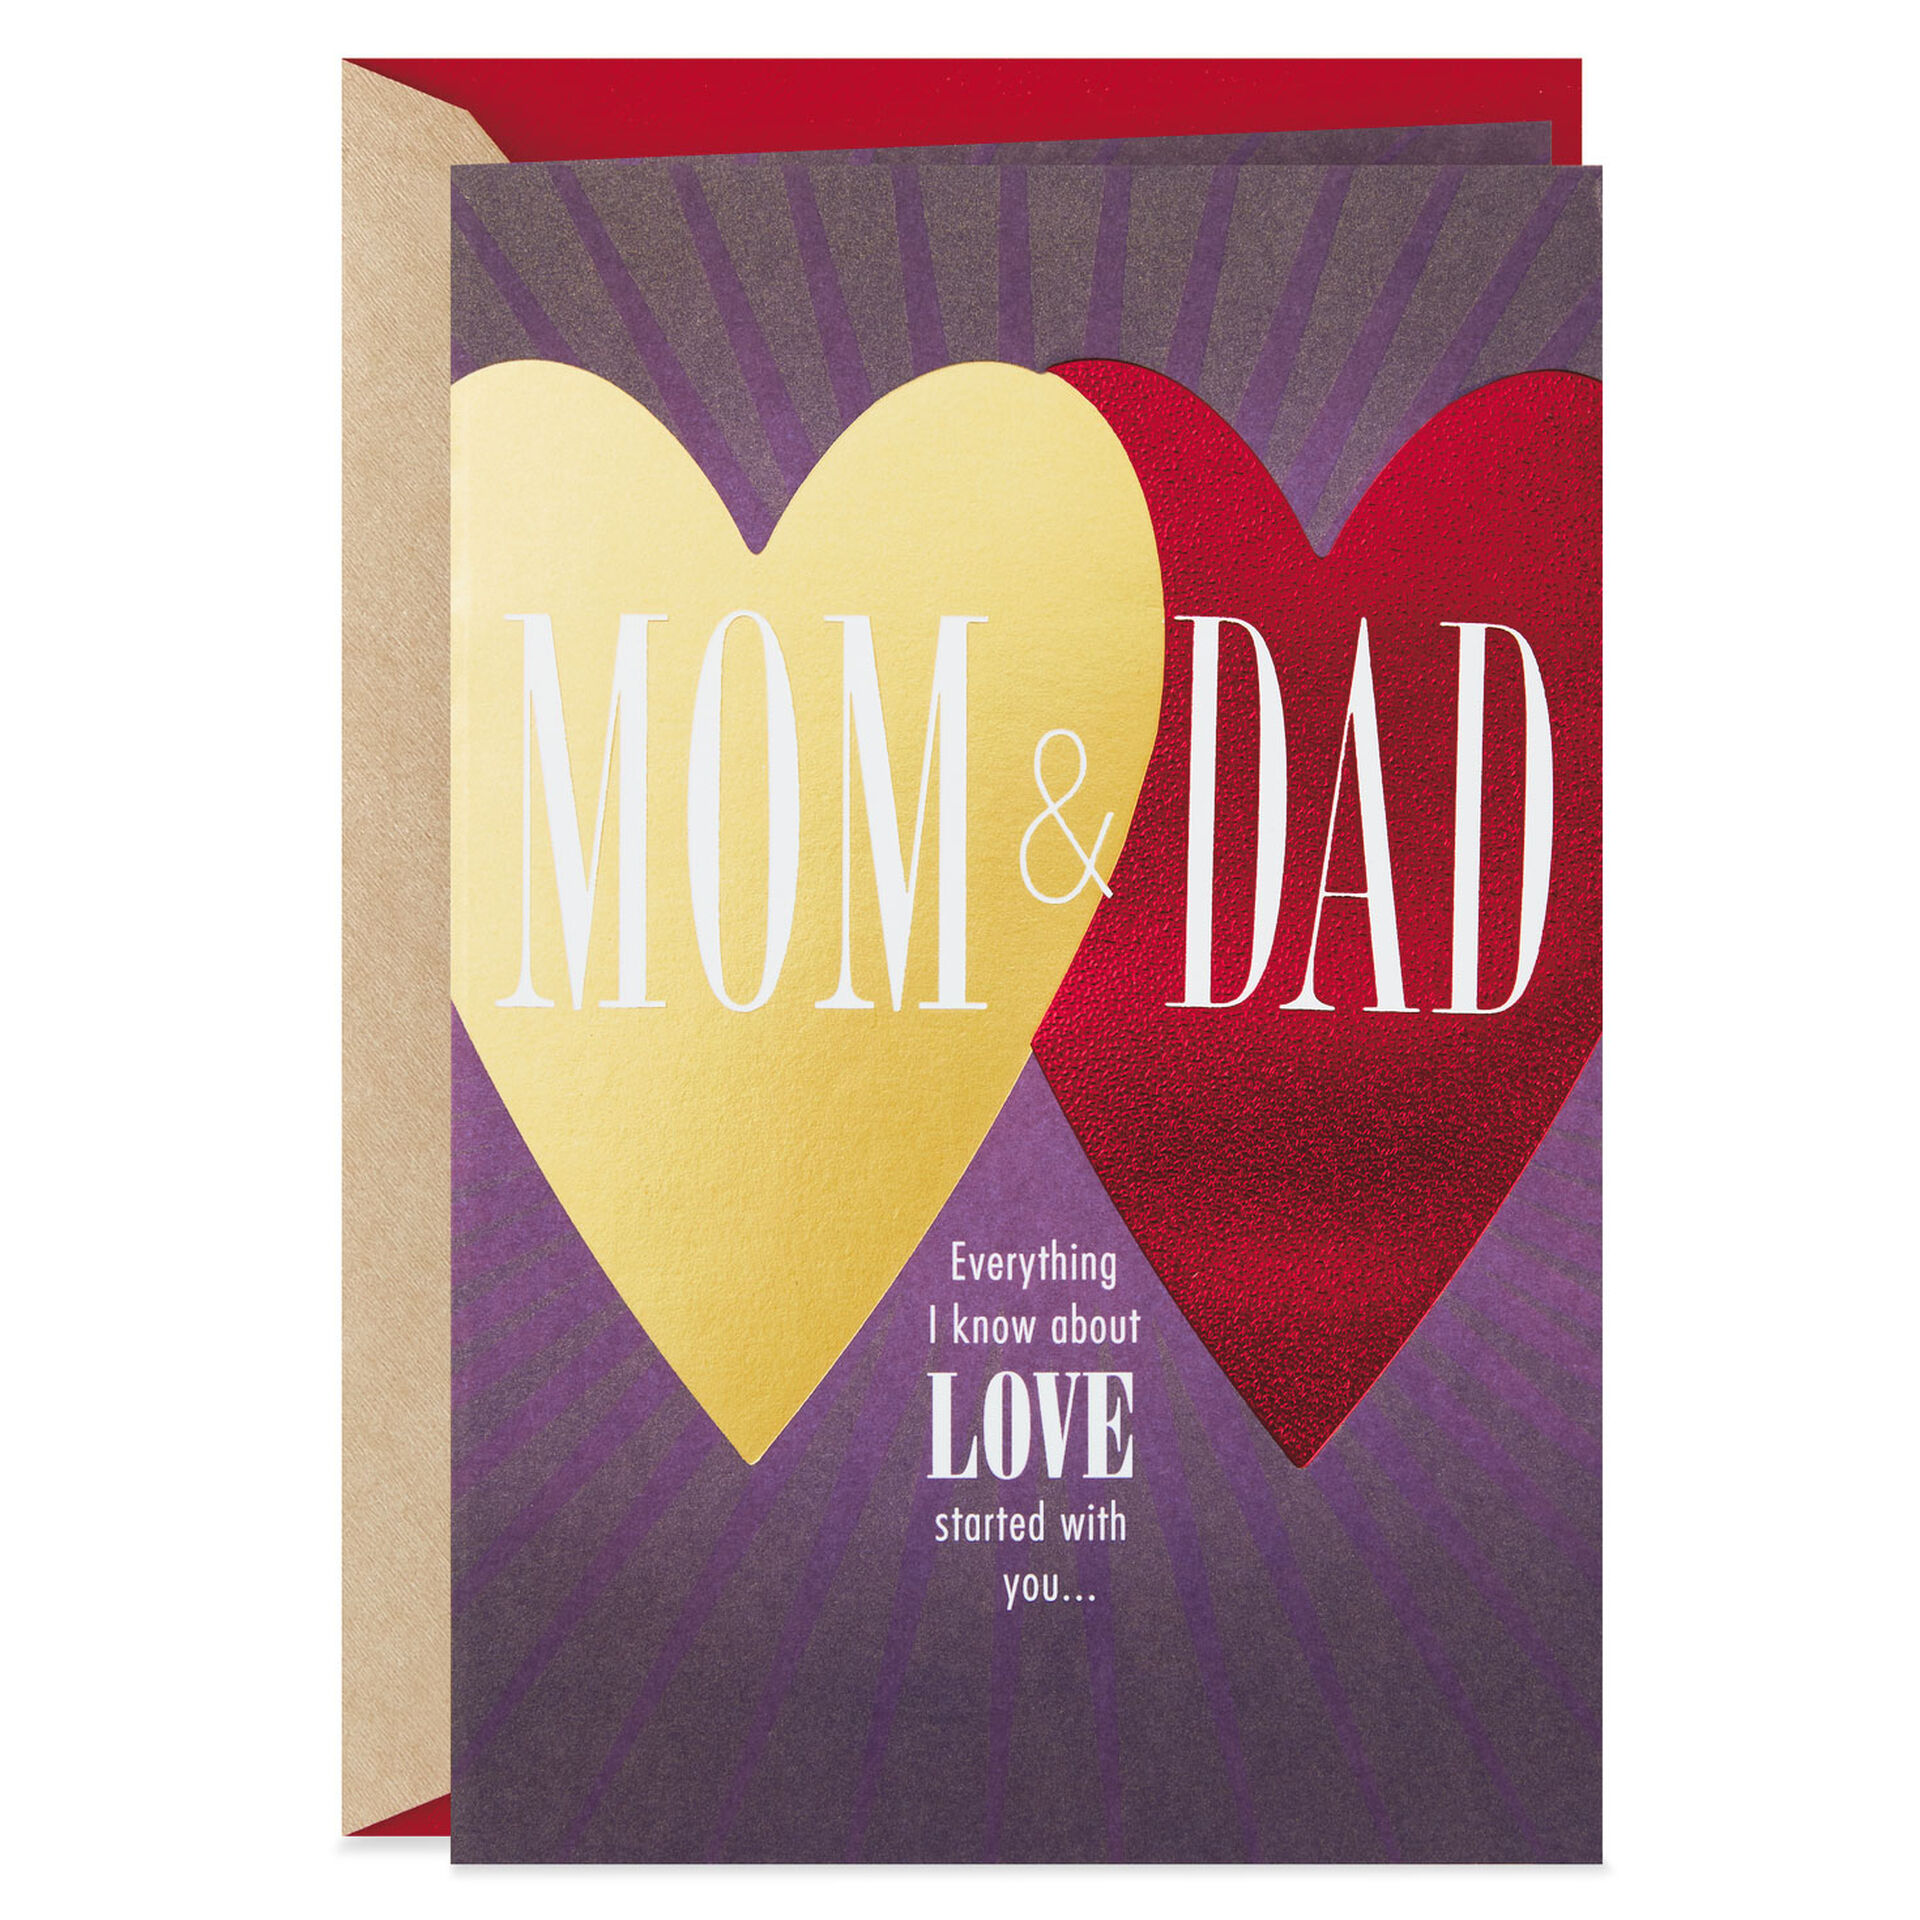 Me To You Valentine's Day Cards for Daughter,Granddaughter,Dad,Mummy,Nan,Friend 